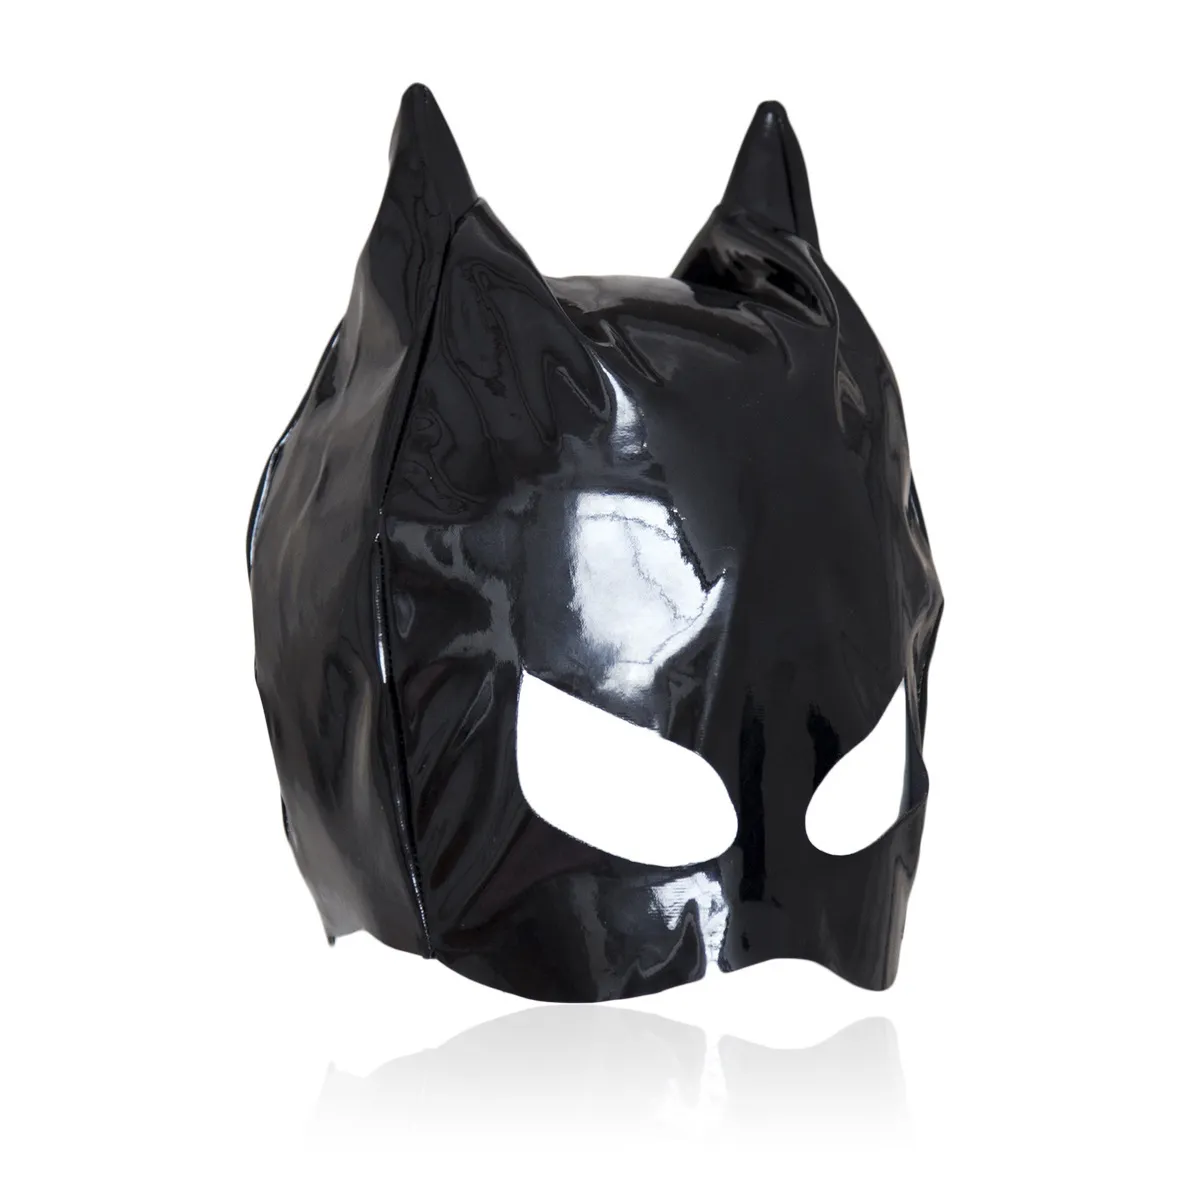 Massage Cosplay Sexy Sexy Love Games Thin Patent Leather Mask Sexy Toys for Woman Fetish Mask Hood Hood Erotic Sexy Products7060543